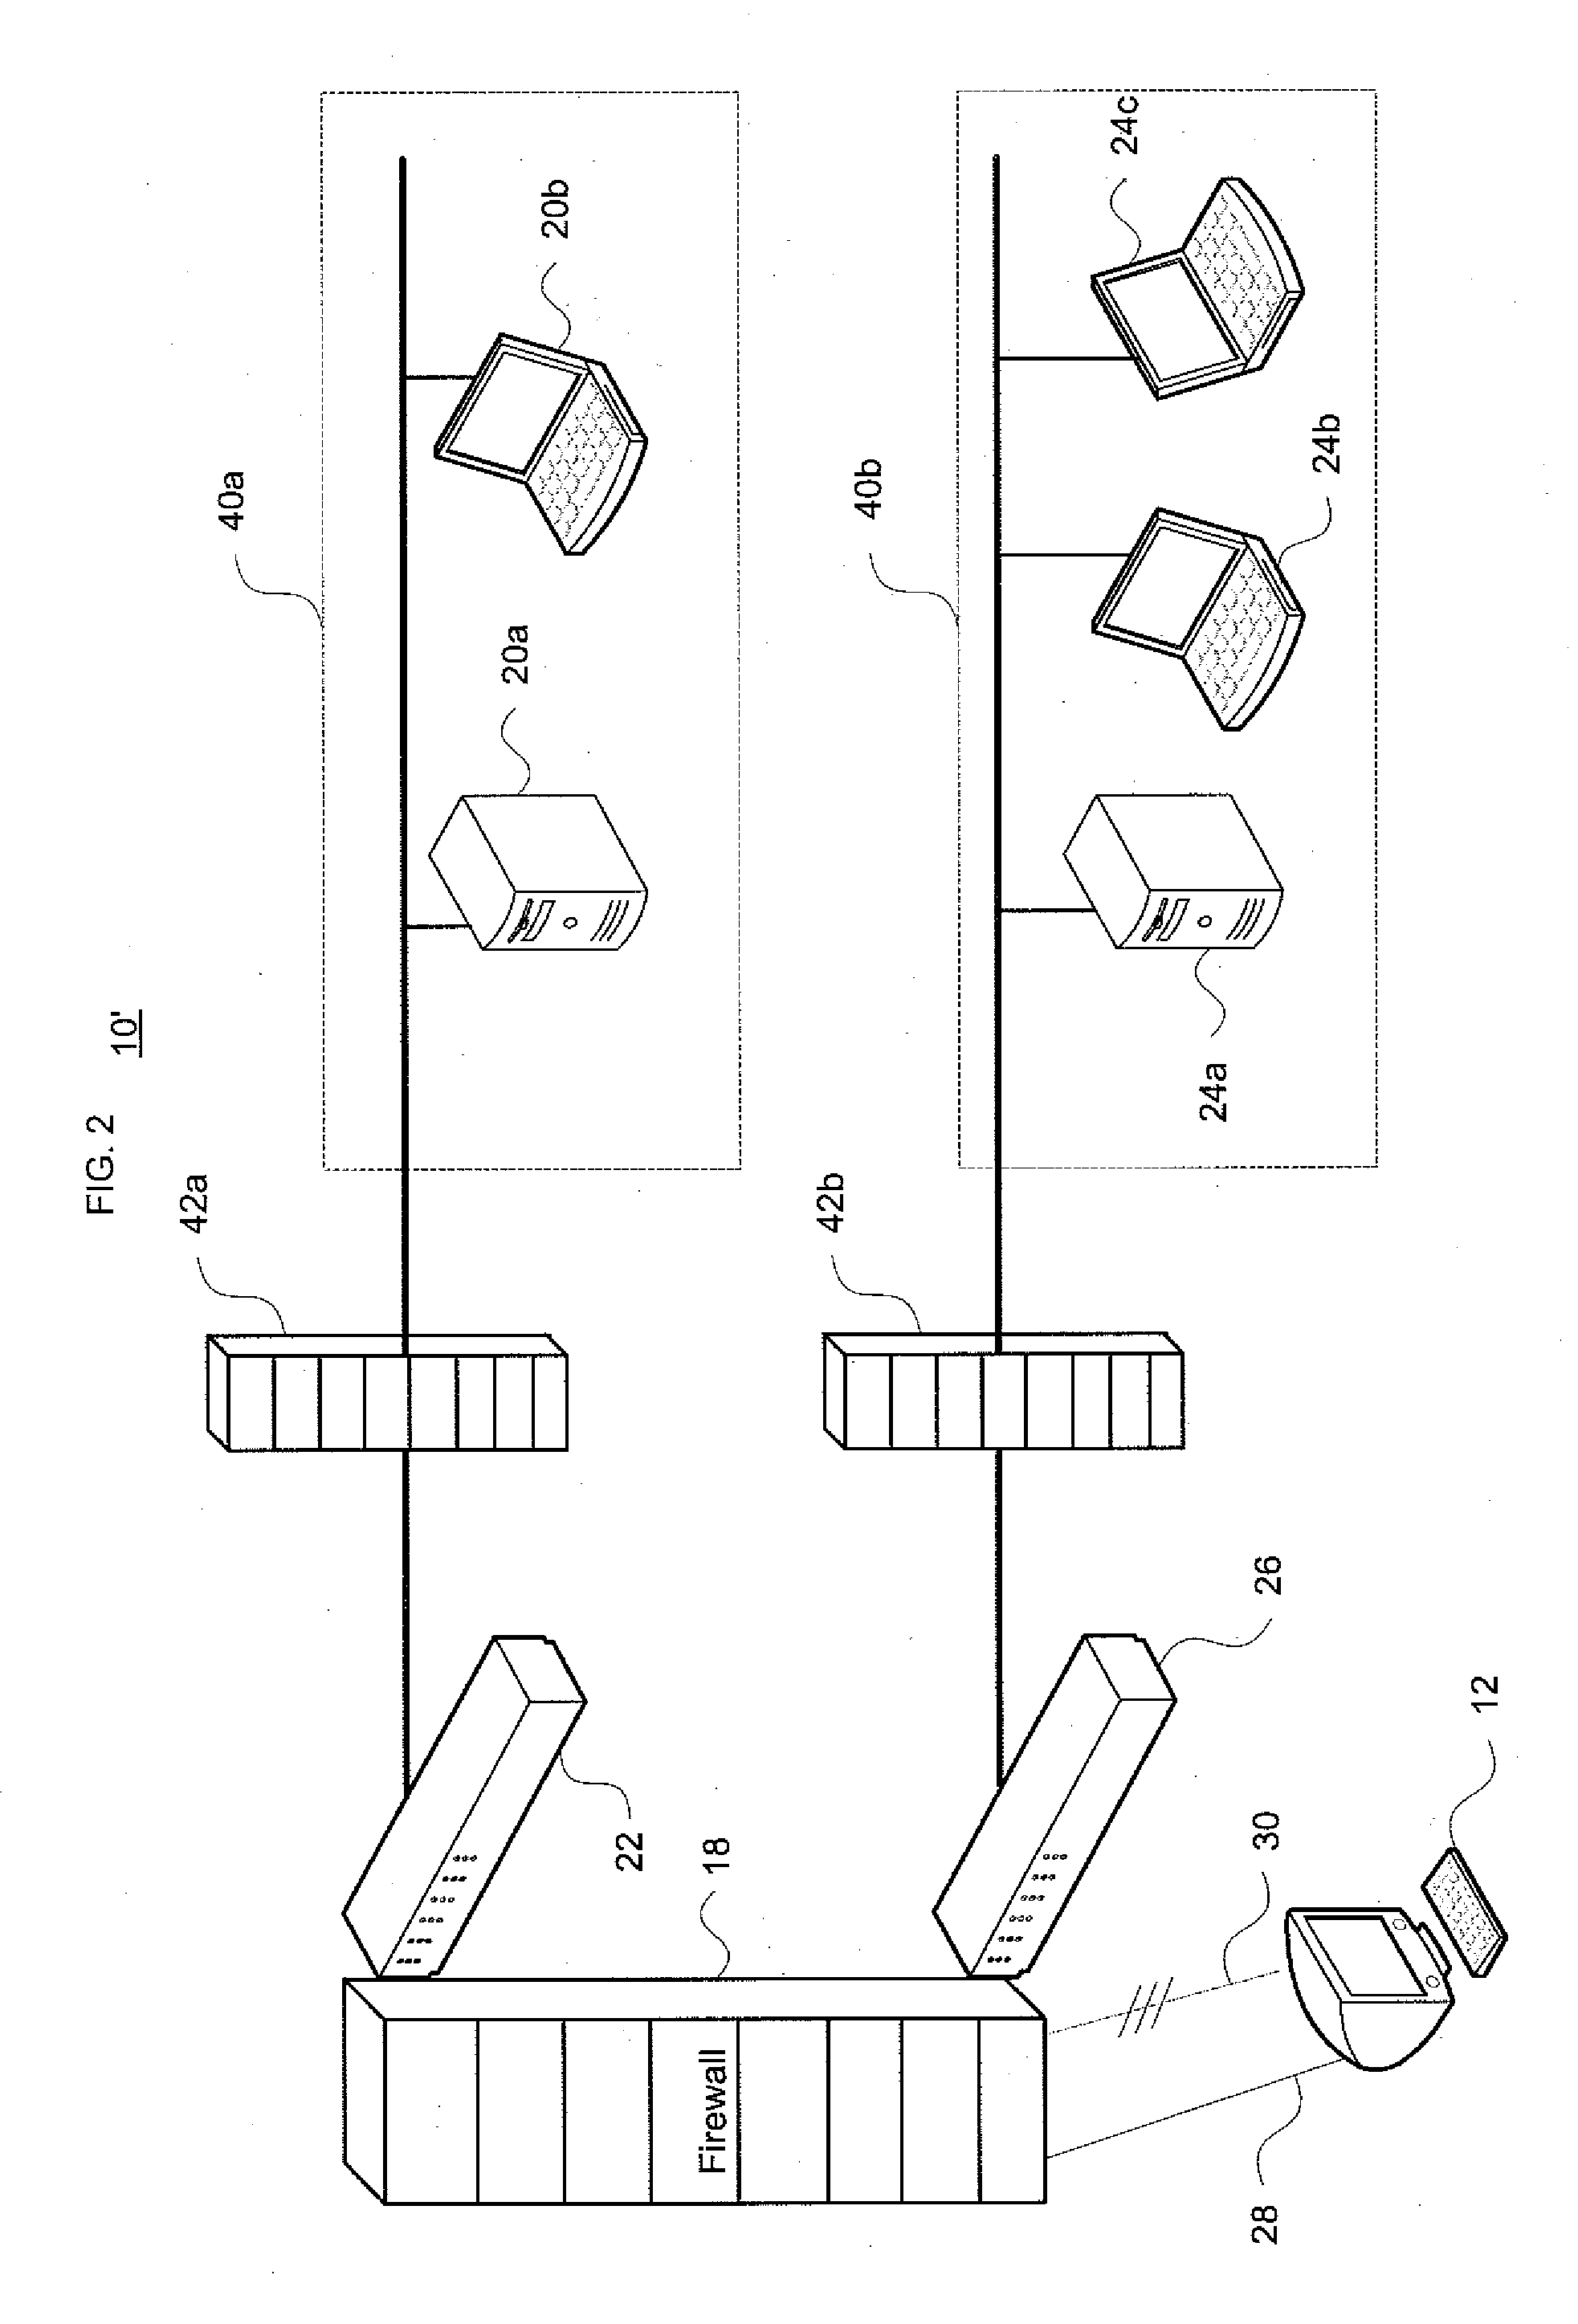 System and method for determining firewall equivalence, union, intersection and difference